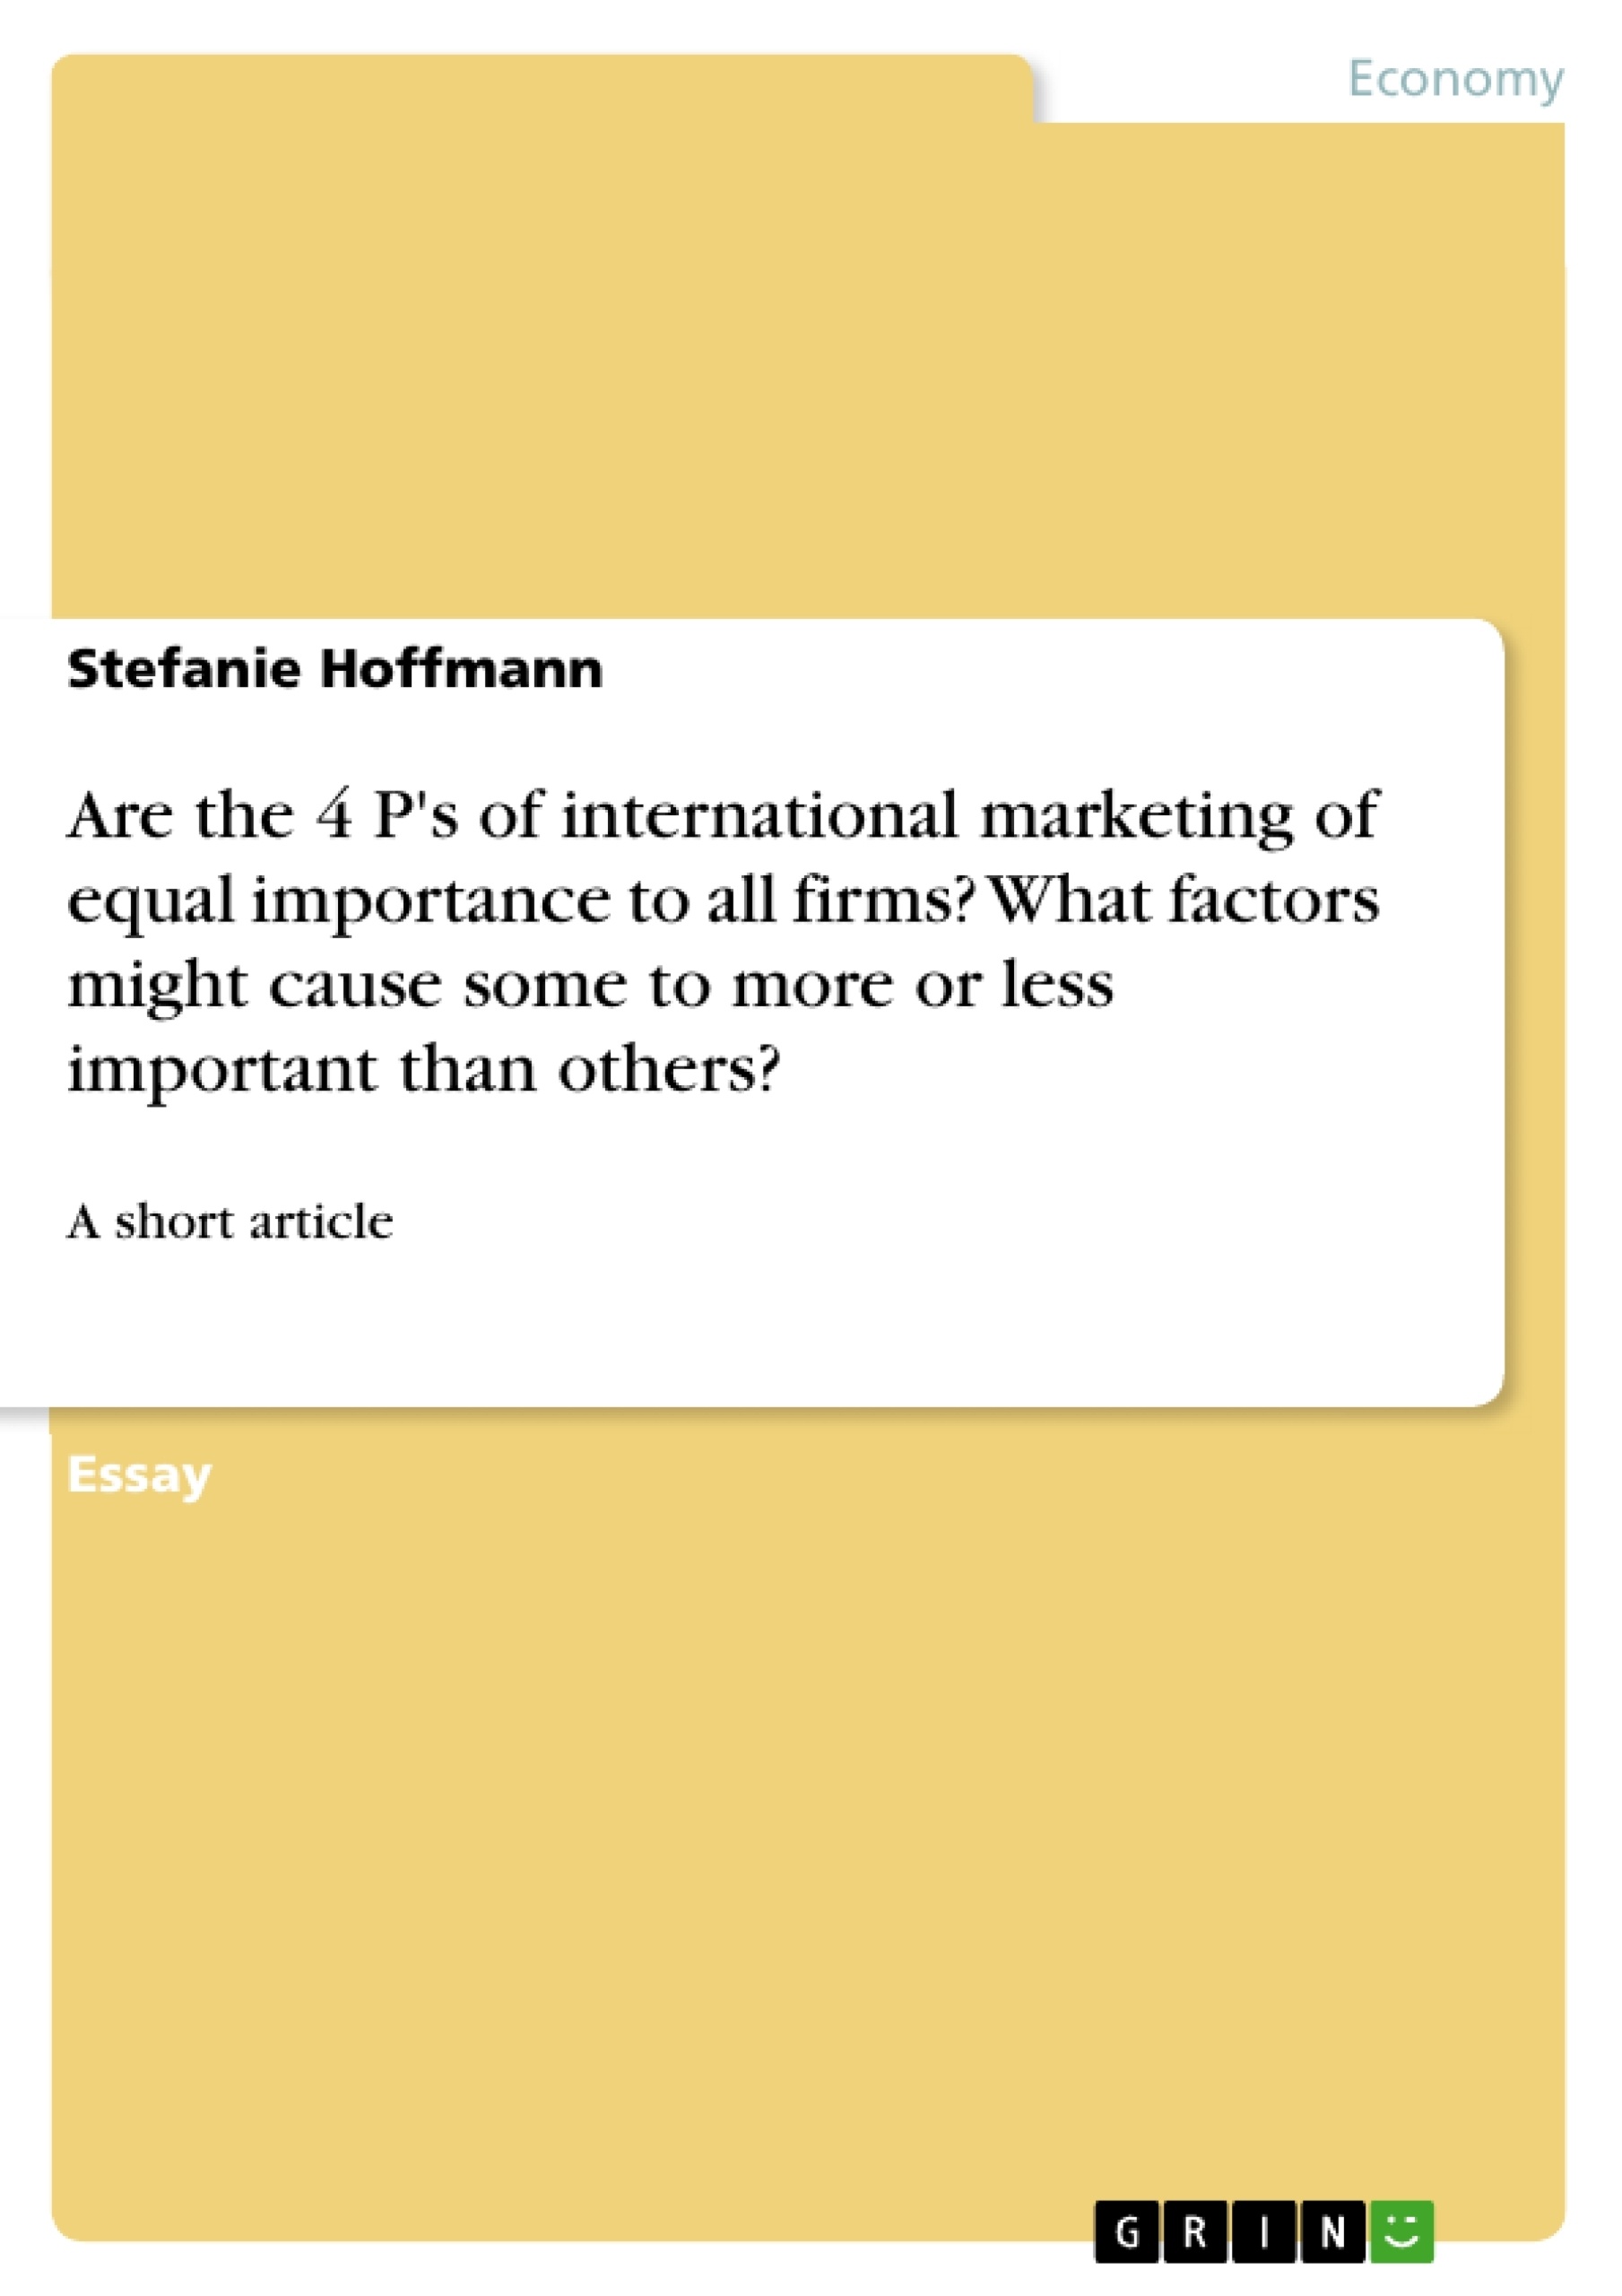 Titel: Are the 4 P's of international marketing of equal importance to all firms? What factors might cause some to more or less important than others?